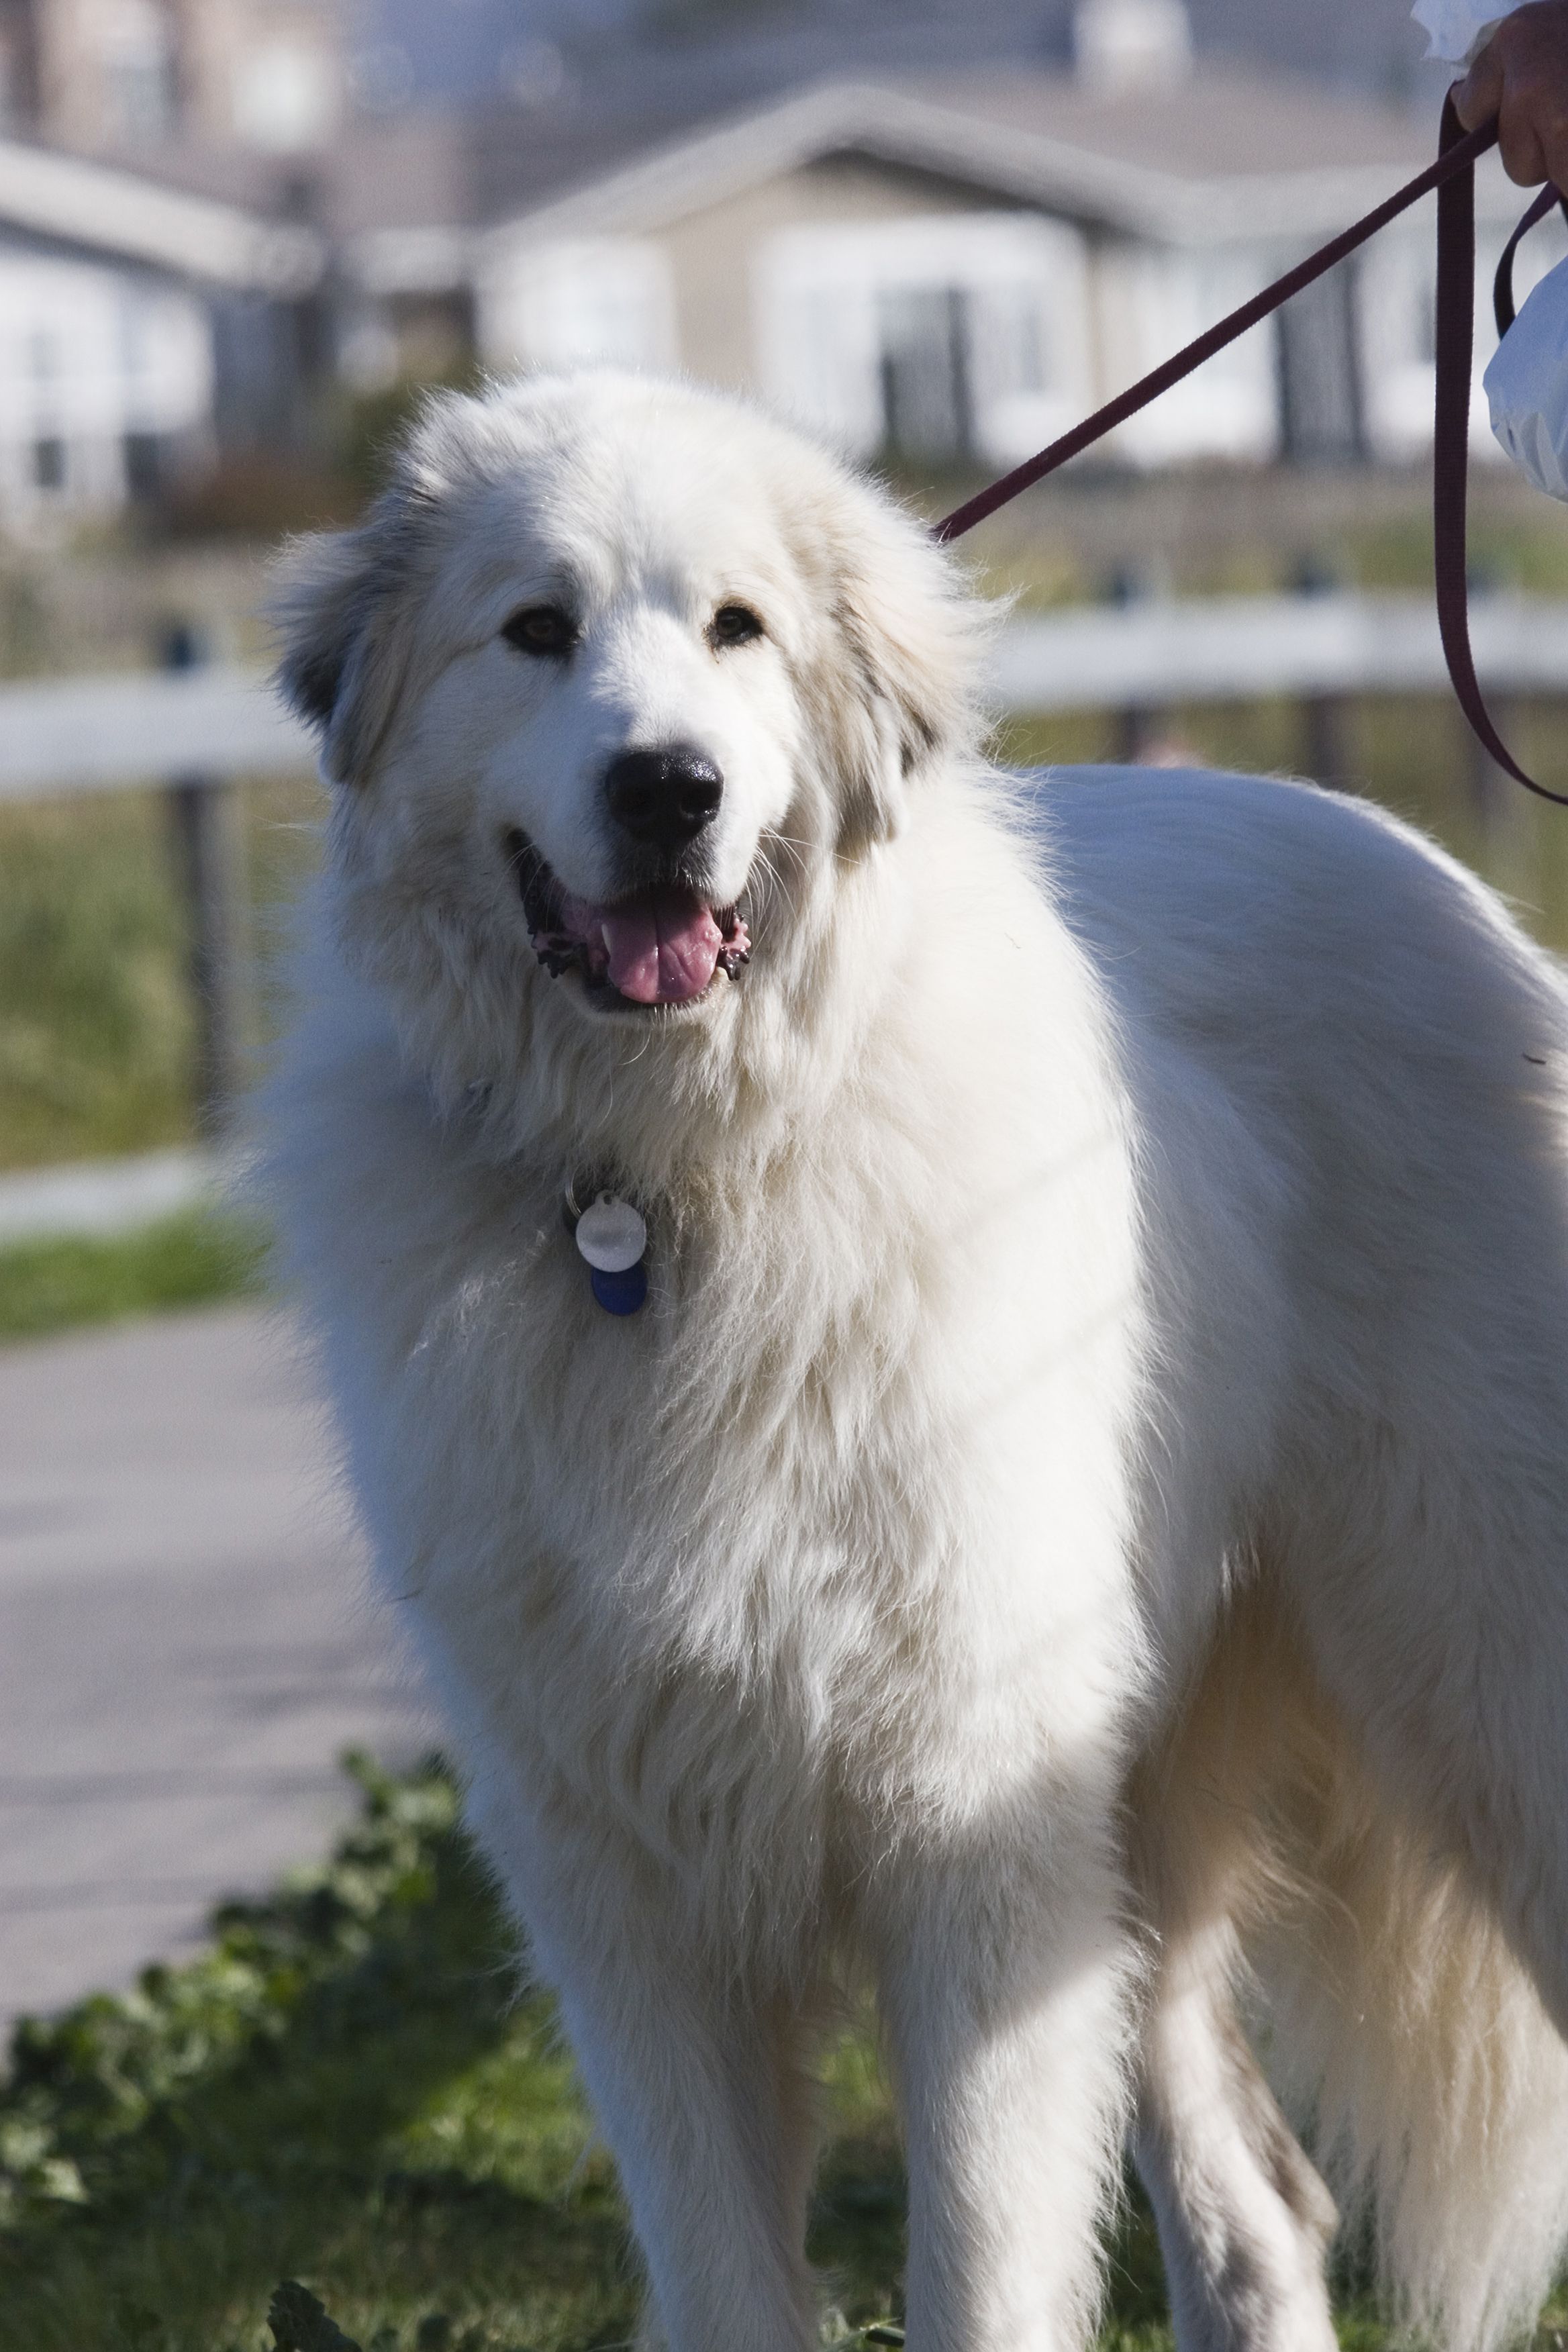 Great Pyrenees dog on the grass photo and wallpaper. Beautiful Great Pyrenees dog on the grass picture